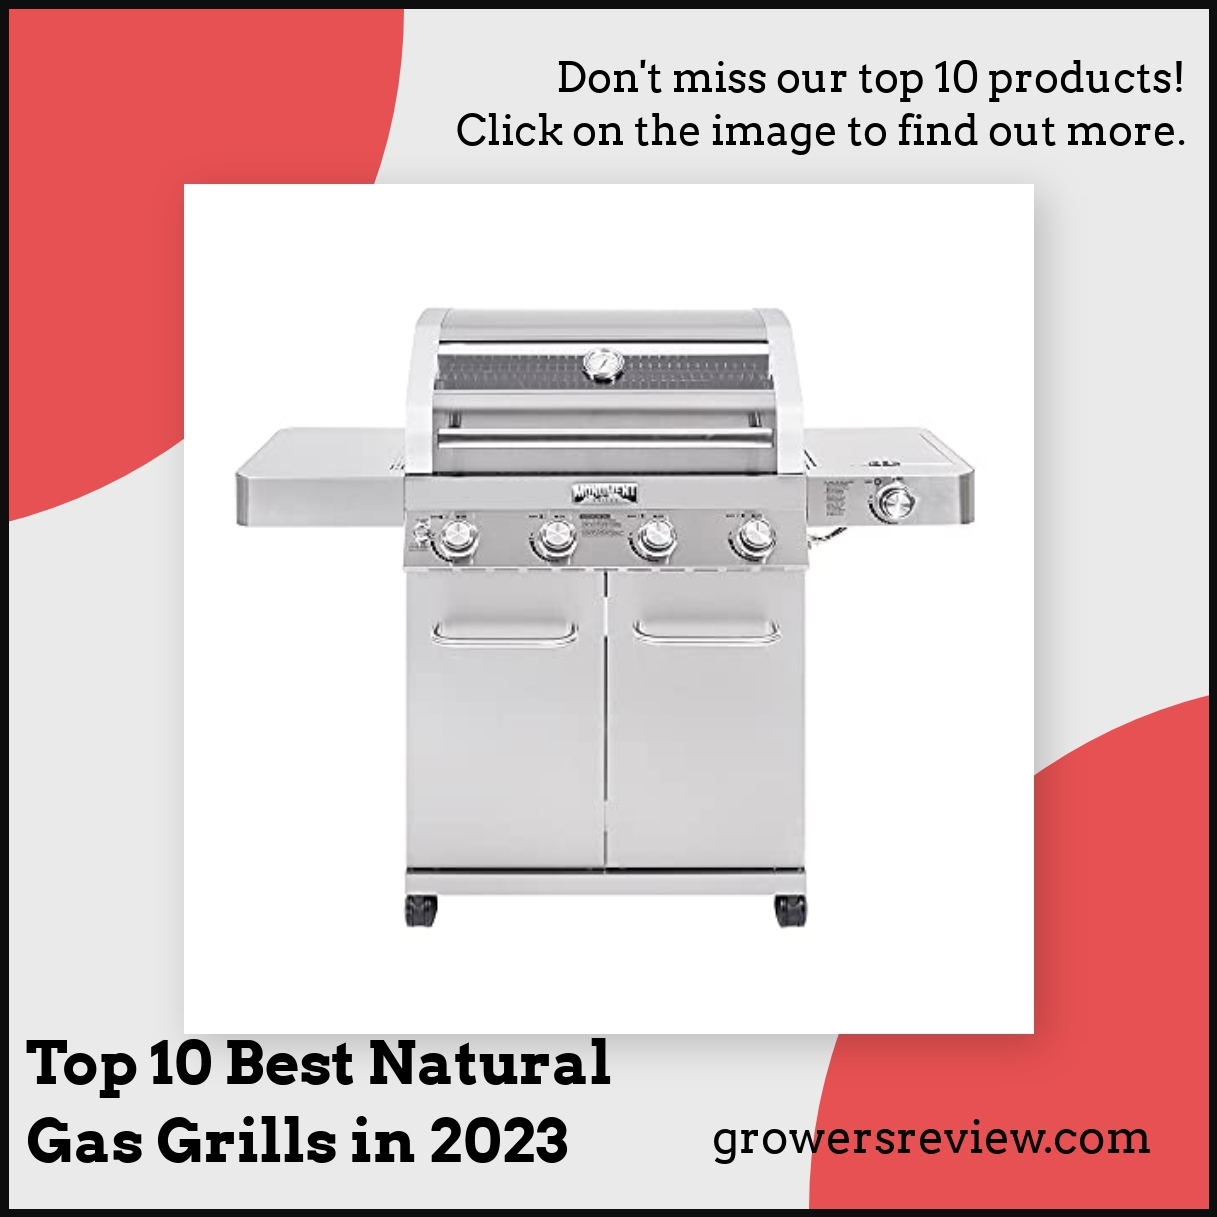 Top 10 Best Natural Gas Grills in 2023